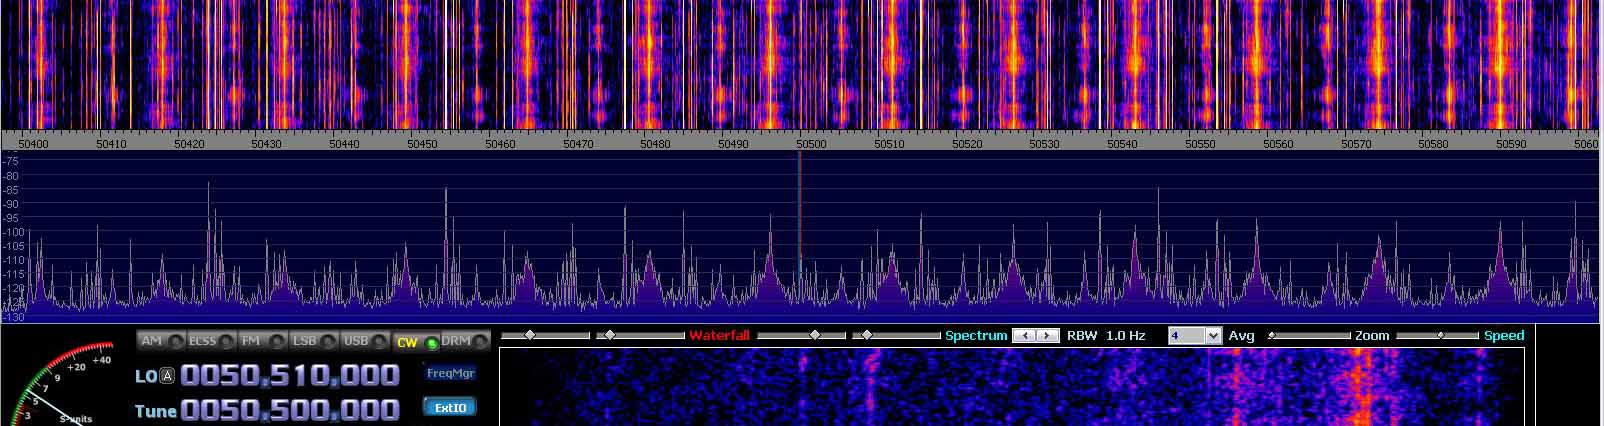 2014-07-04 50.500 MHz +- 100 kHz - Strong Es - 4-el dipole array with ends to St P - (c) OH7HJ.JPG